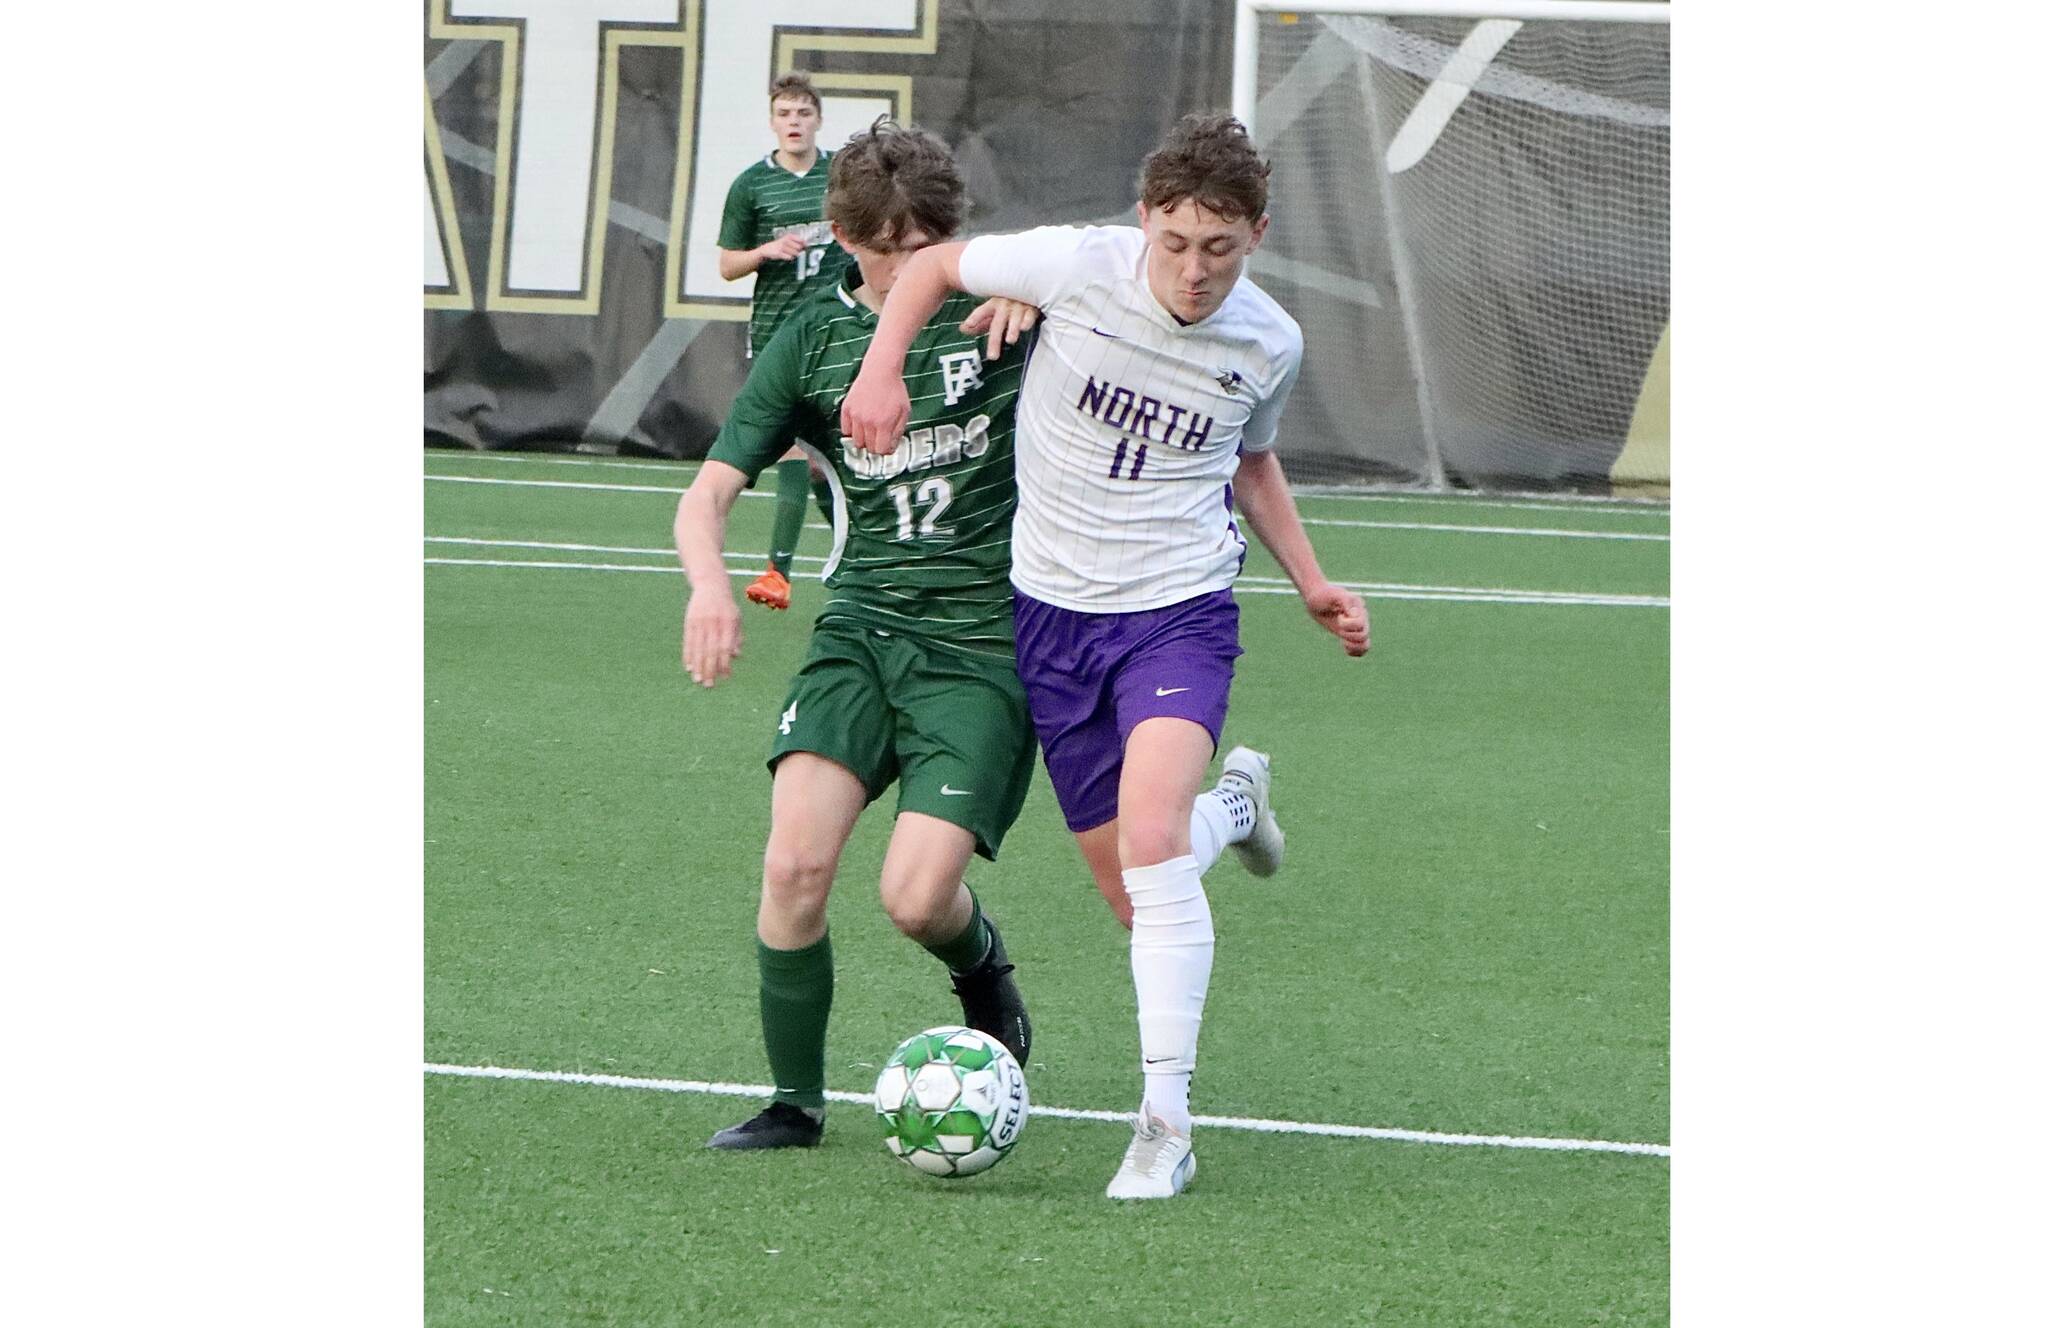 Port Angeles soccer player Sebastian Bautista (12) is elbowed out of the way by North Kitsap’s Ethan Peck (11) Friday night at Wally Sigmar Field at Peninsula College. (Dave Logan/for Peninsula Daily News).